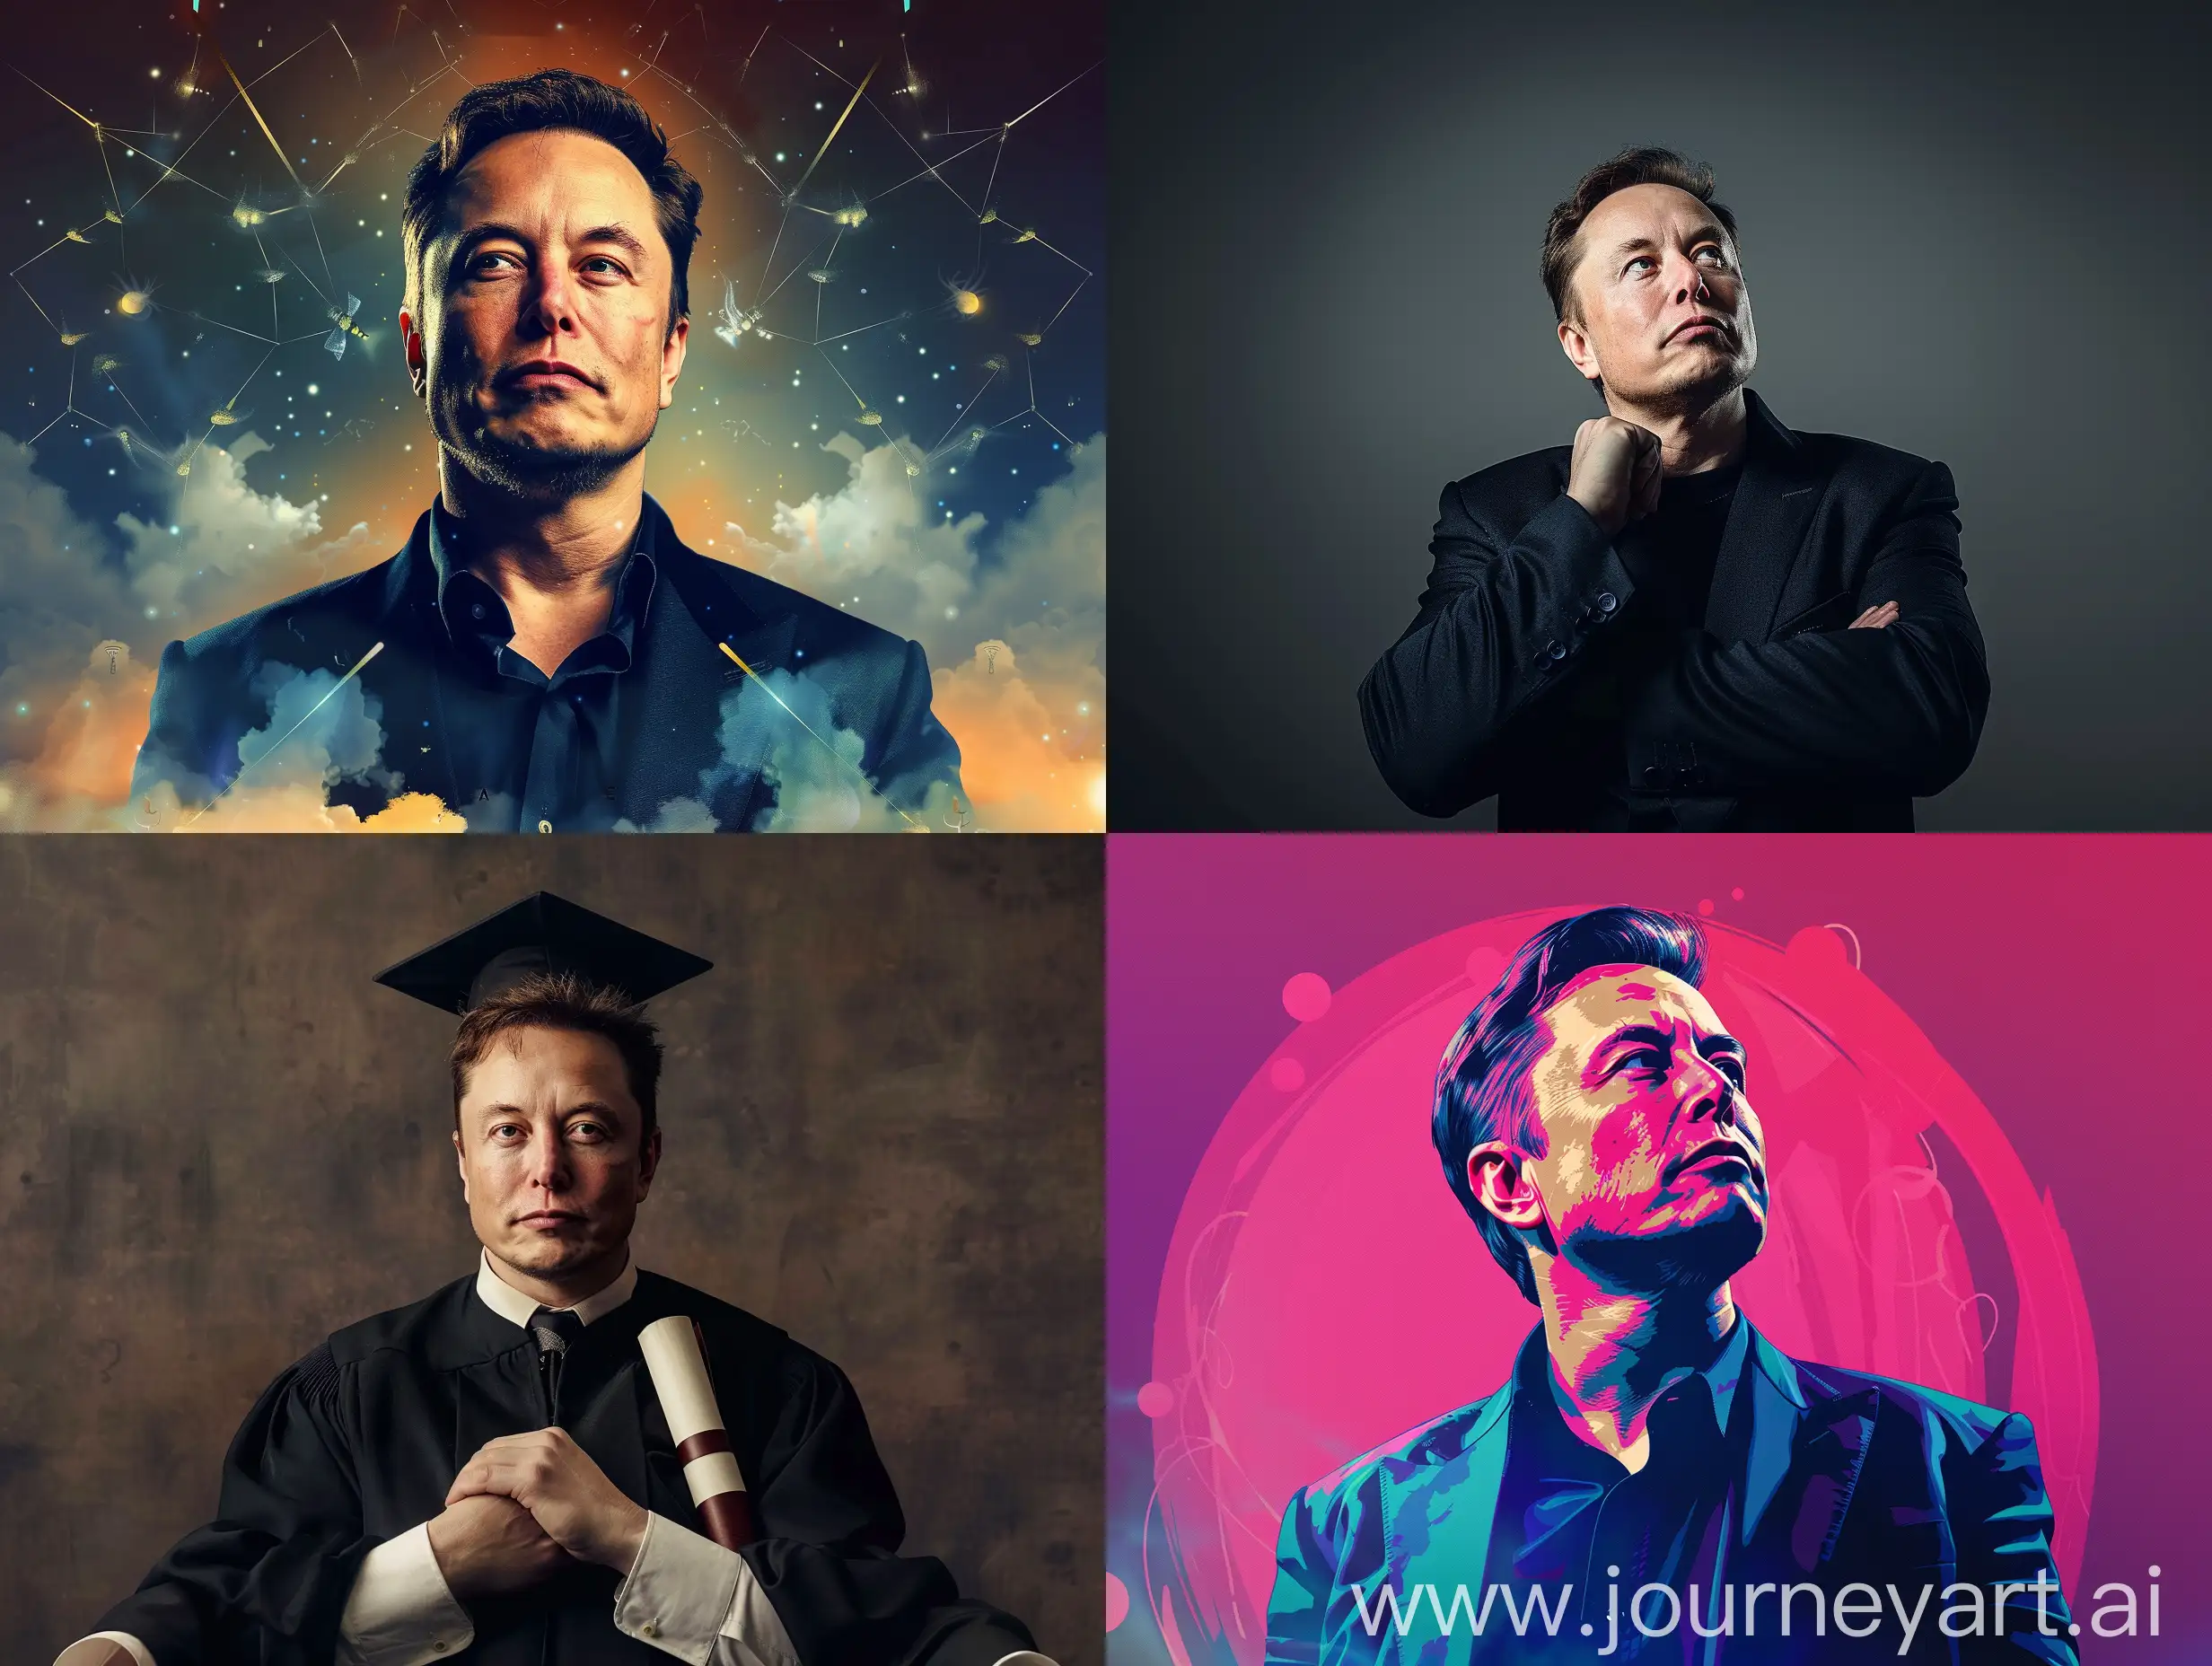 An image of Elon Musk that refers to the fact that no university degree is needed to show a person's abilities